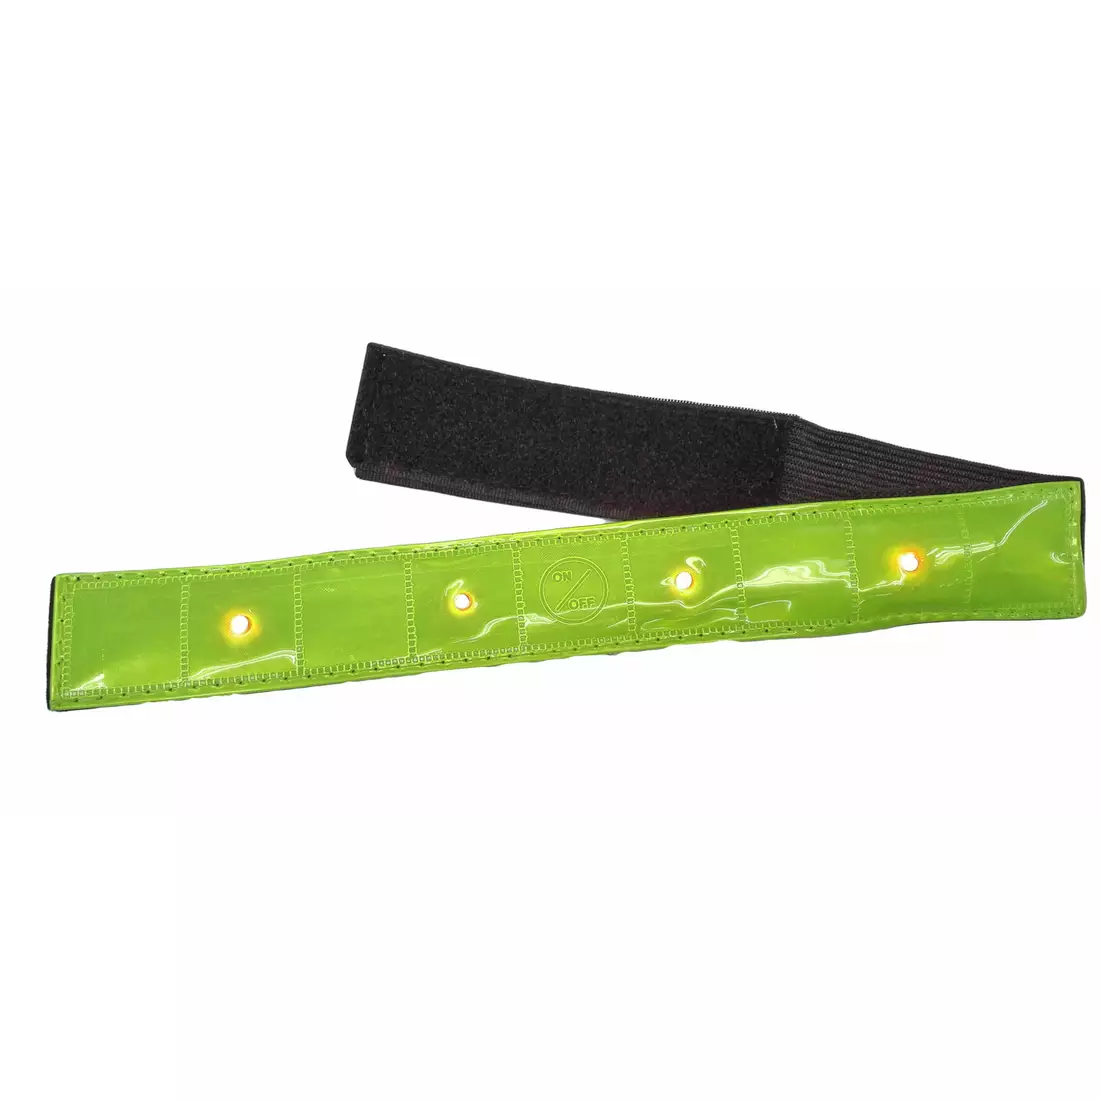 SPENCER reflective band with LED diodes